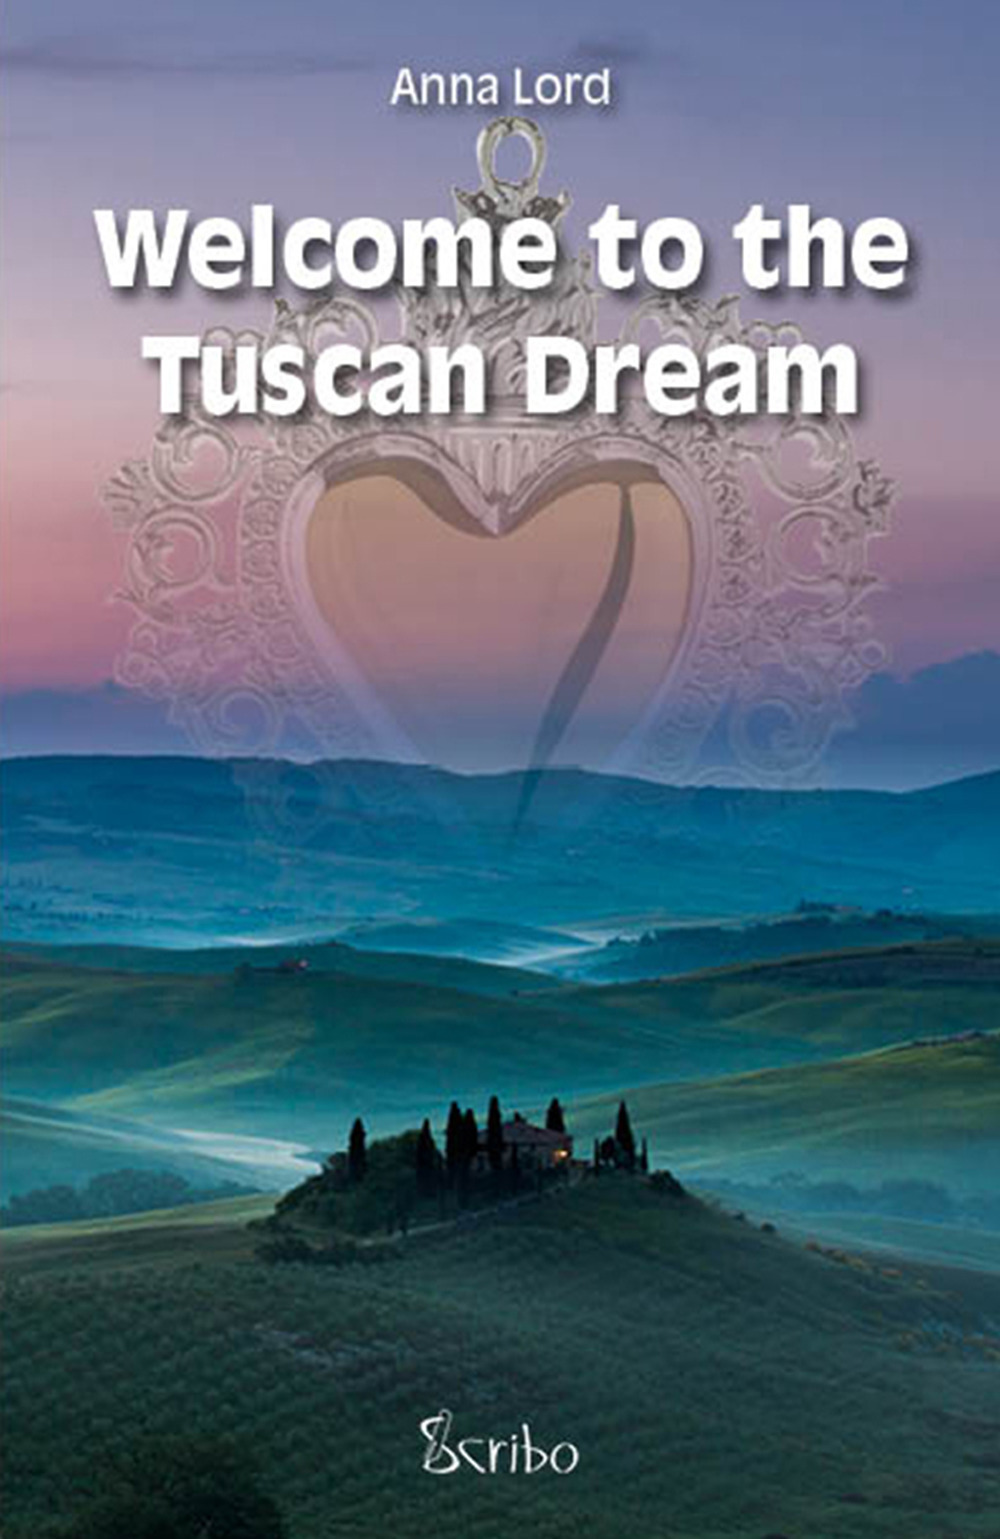 Welcome to the Tuscan dream